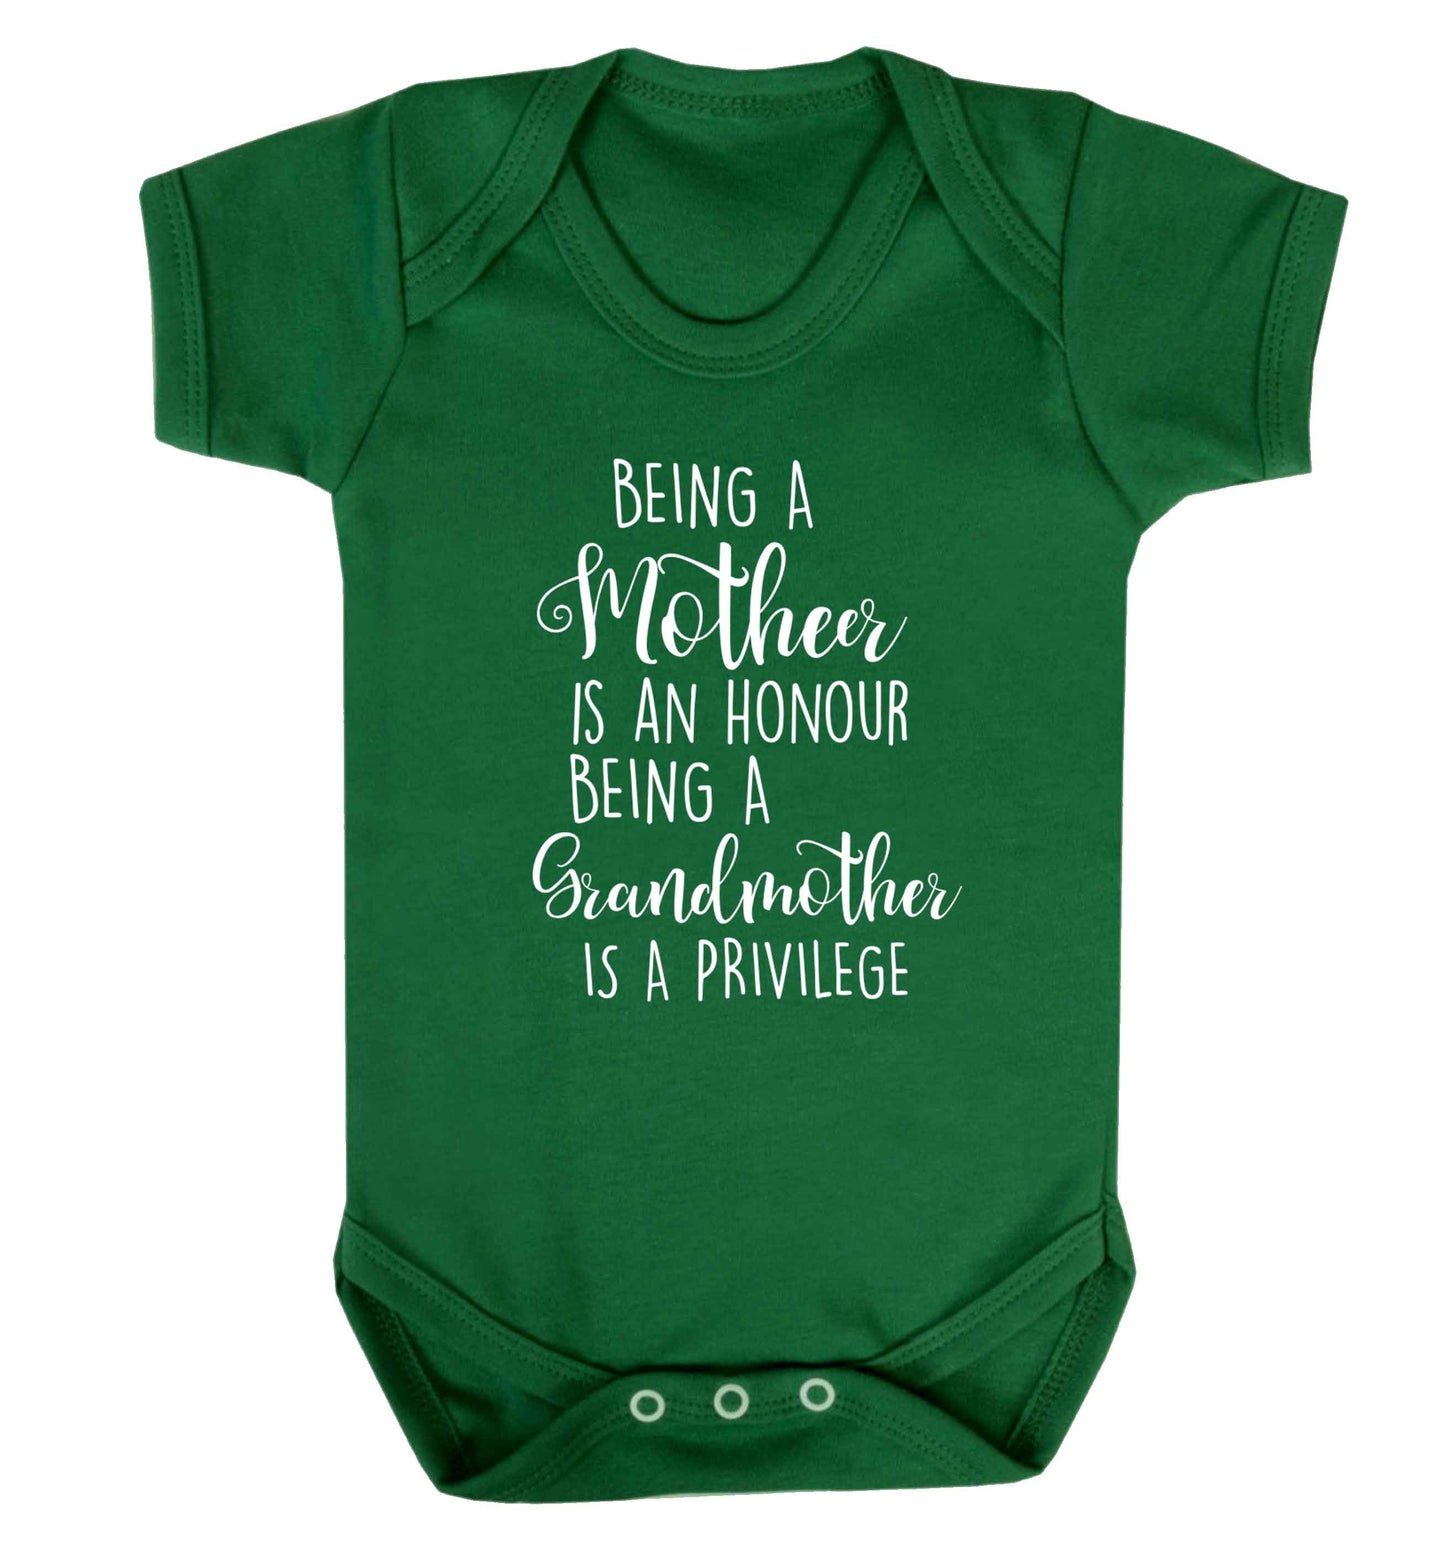 Being a mother is an honour being an grandmother is a privilege Baby Vest green 18-24 months